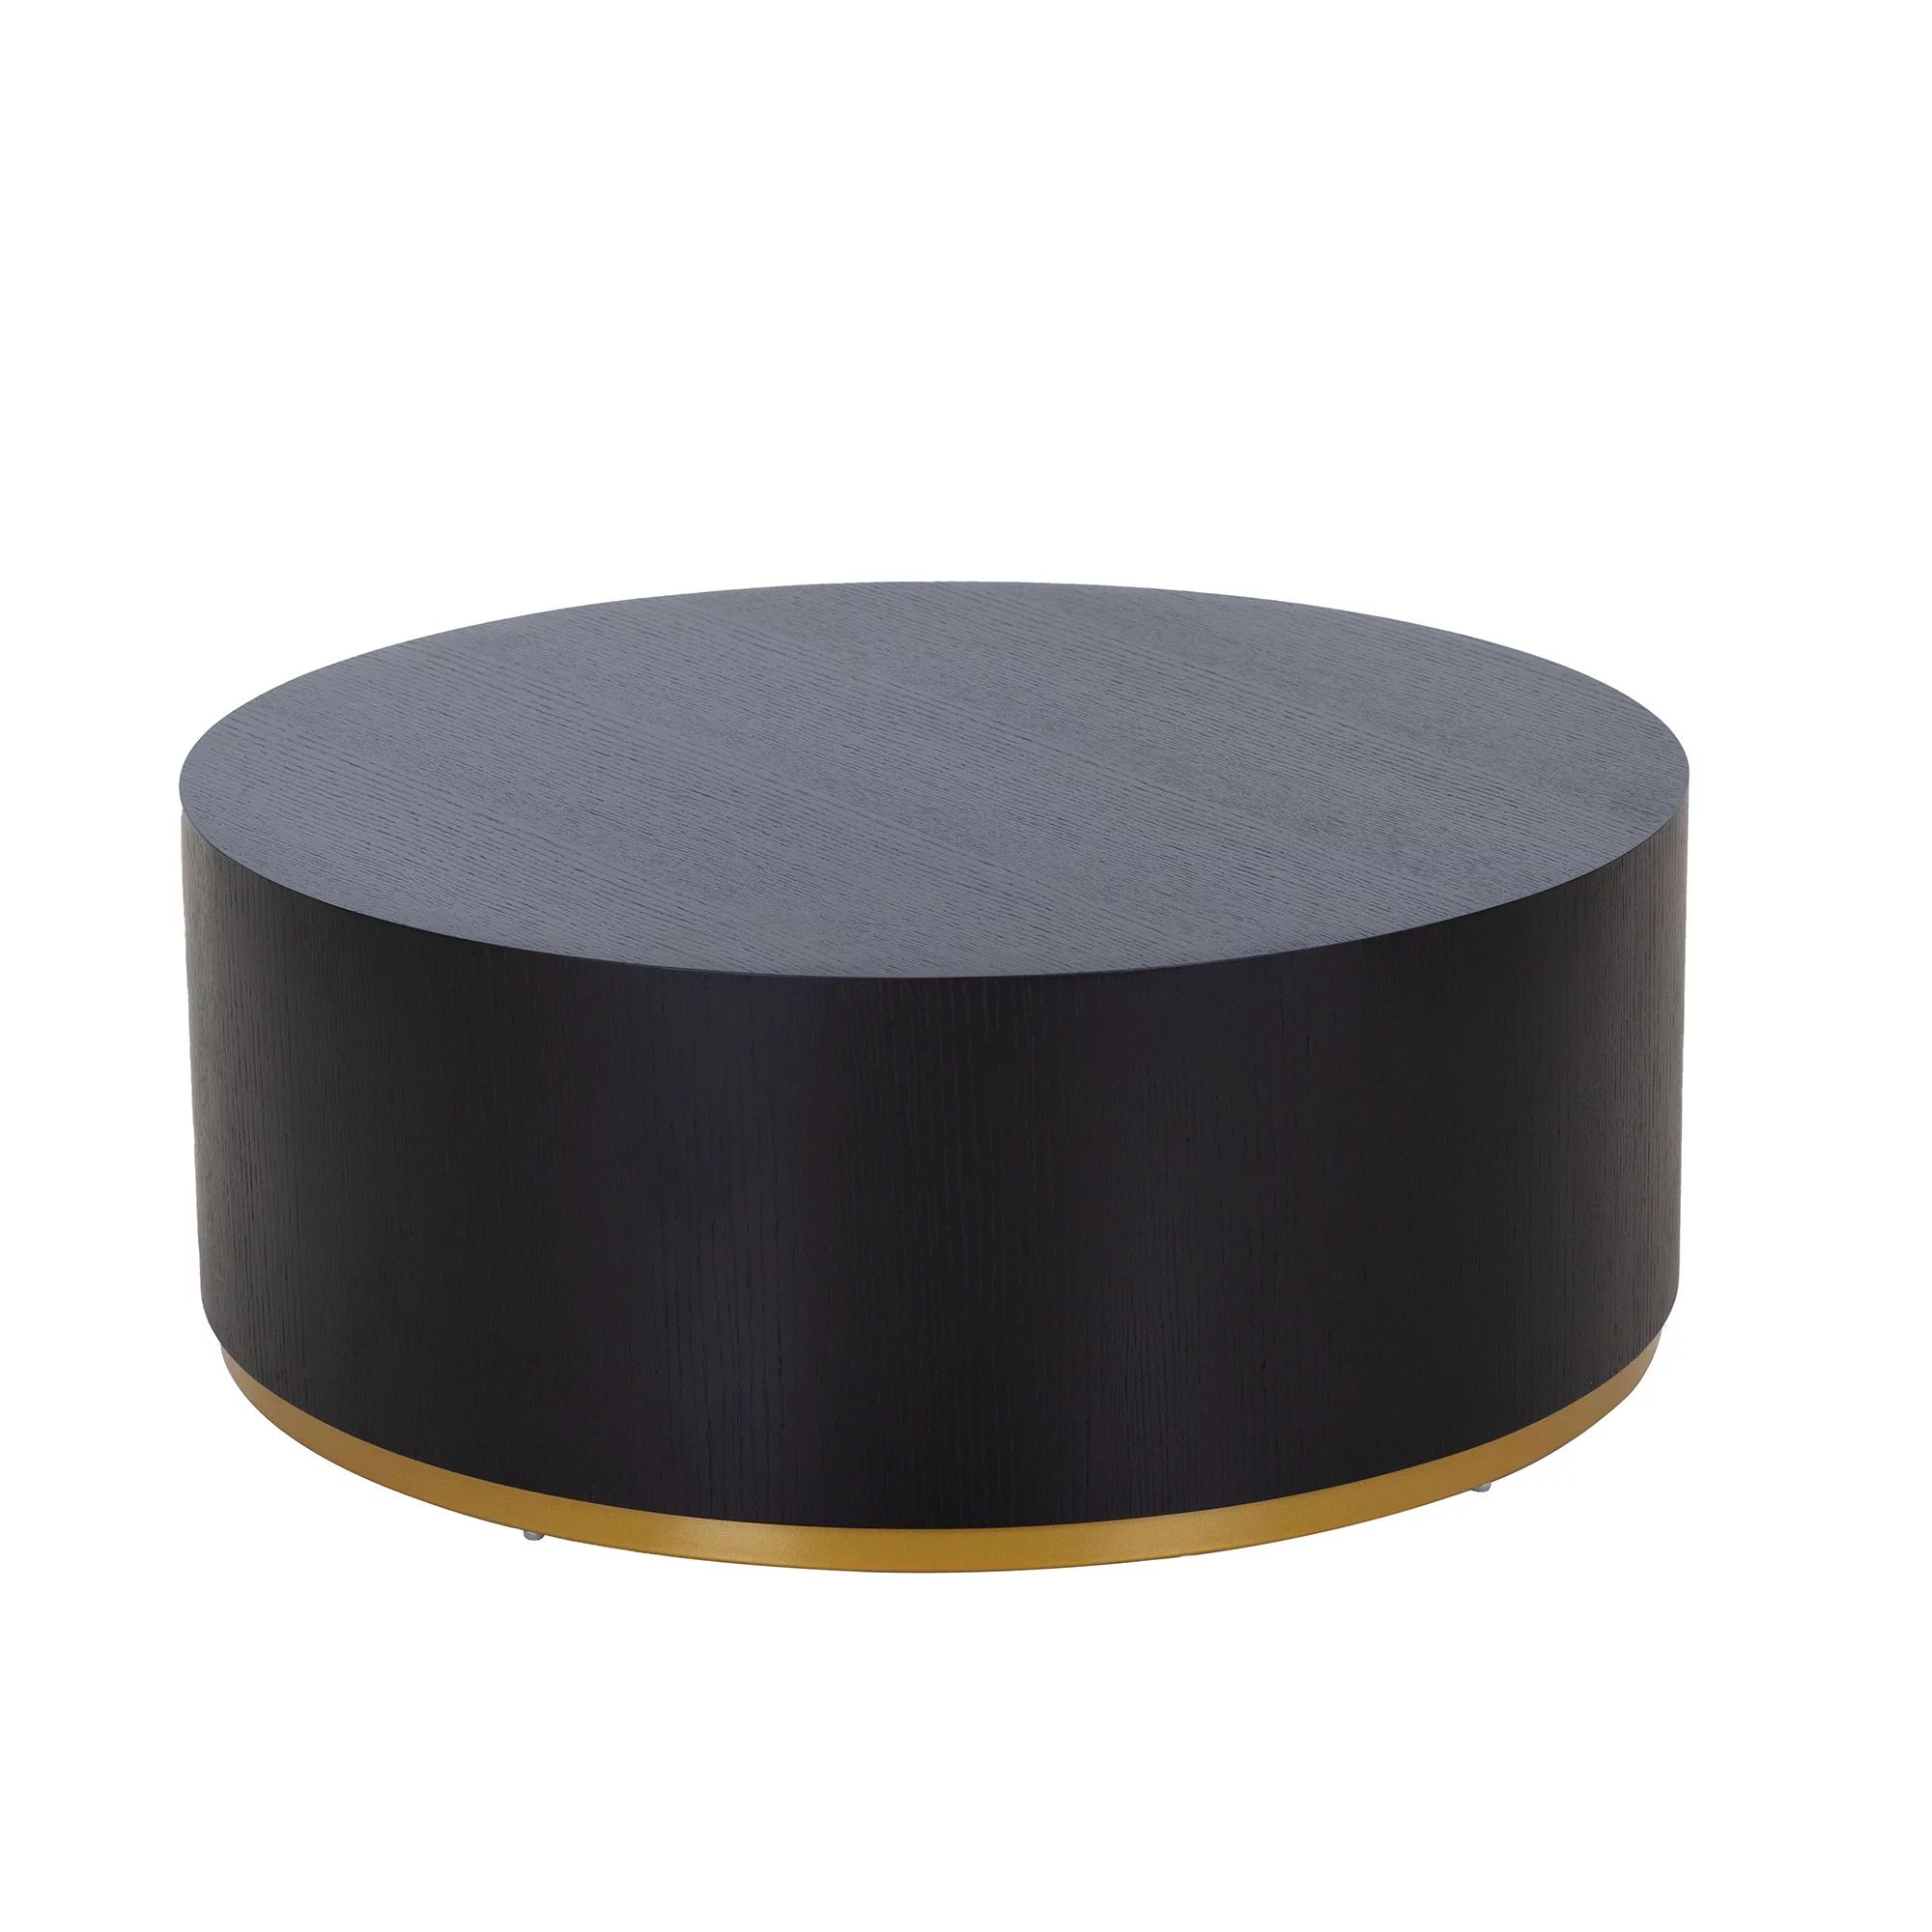 Kevinplus Black Coffee Table with Gold Rim Bottom End Table Round Wood Side Table for Living Room... | Walmart (US)